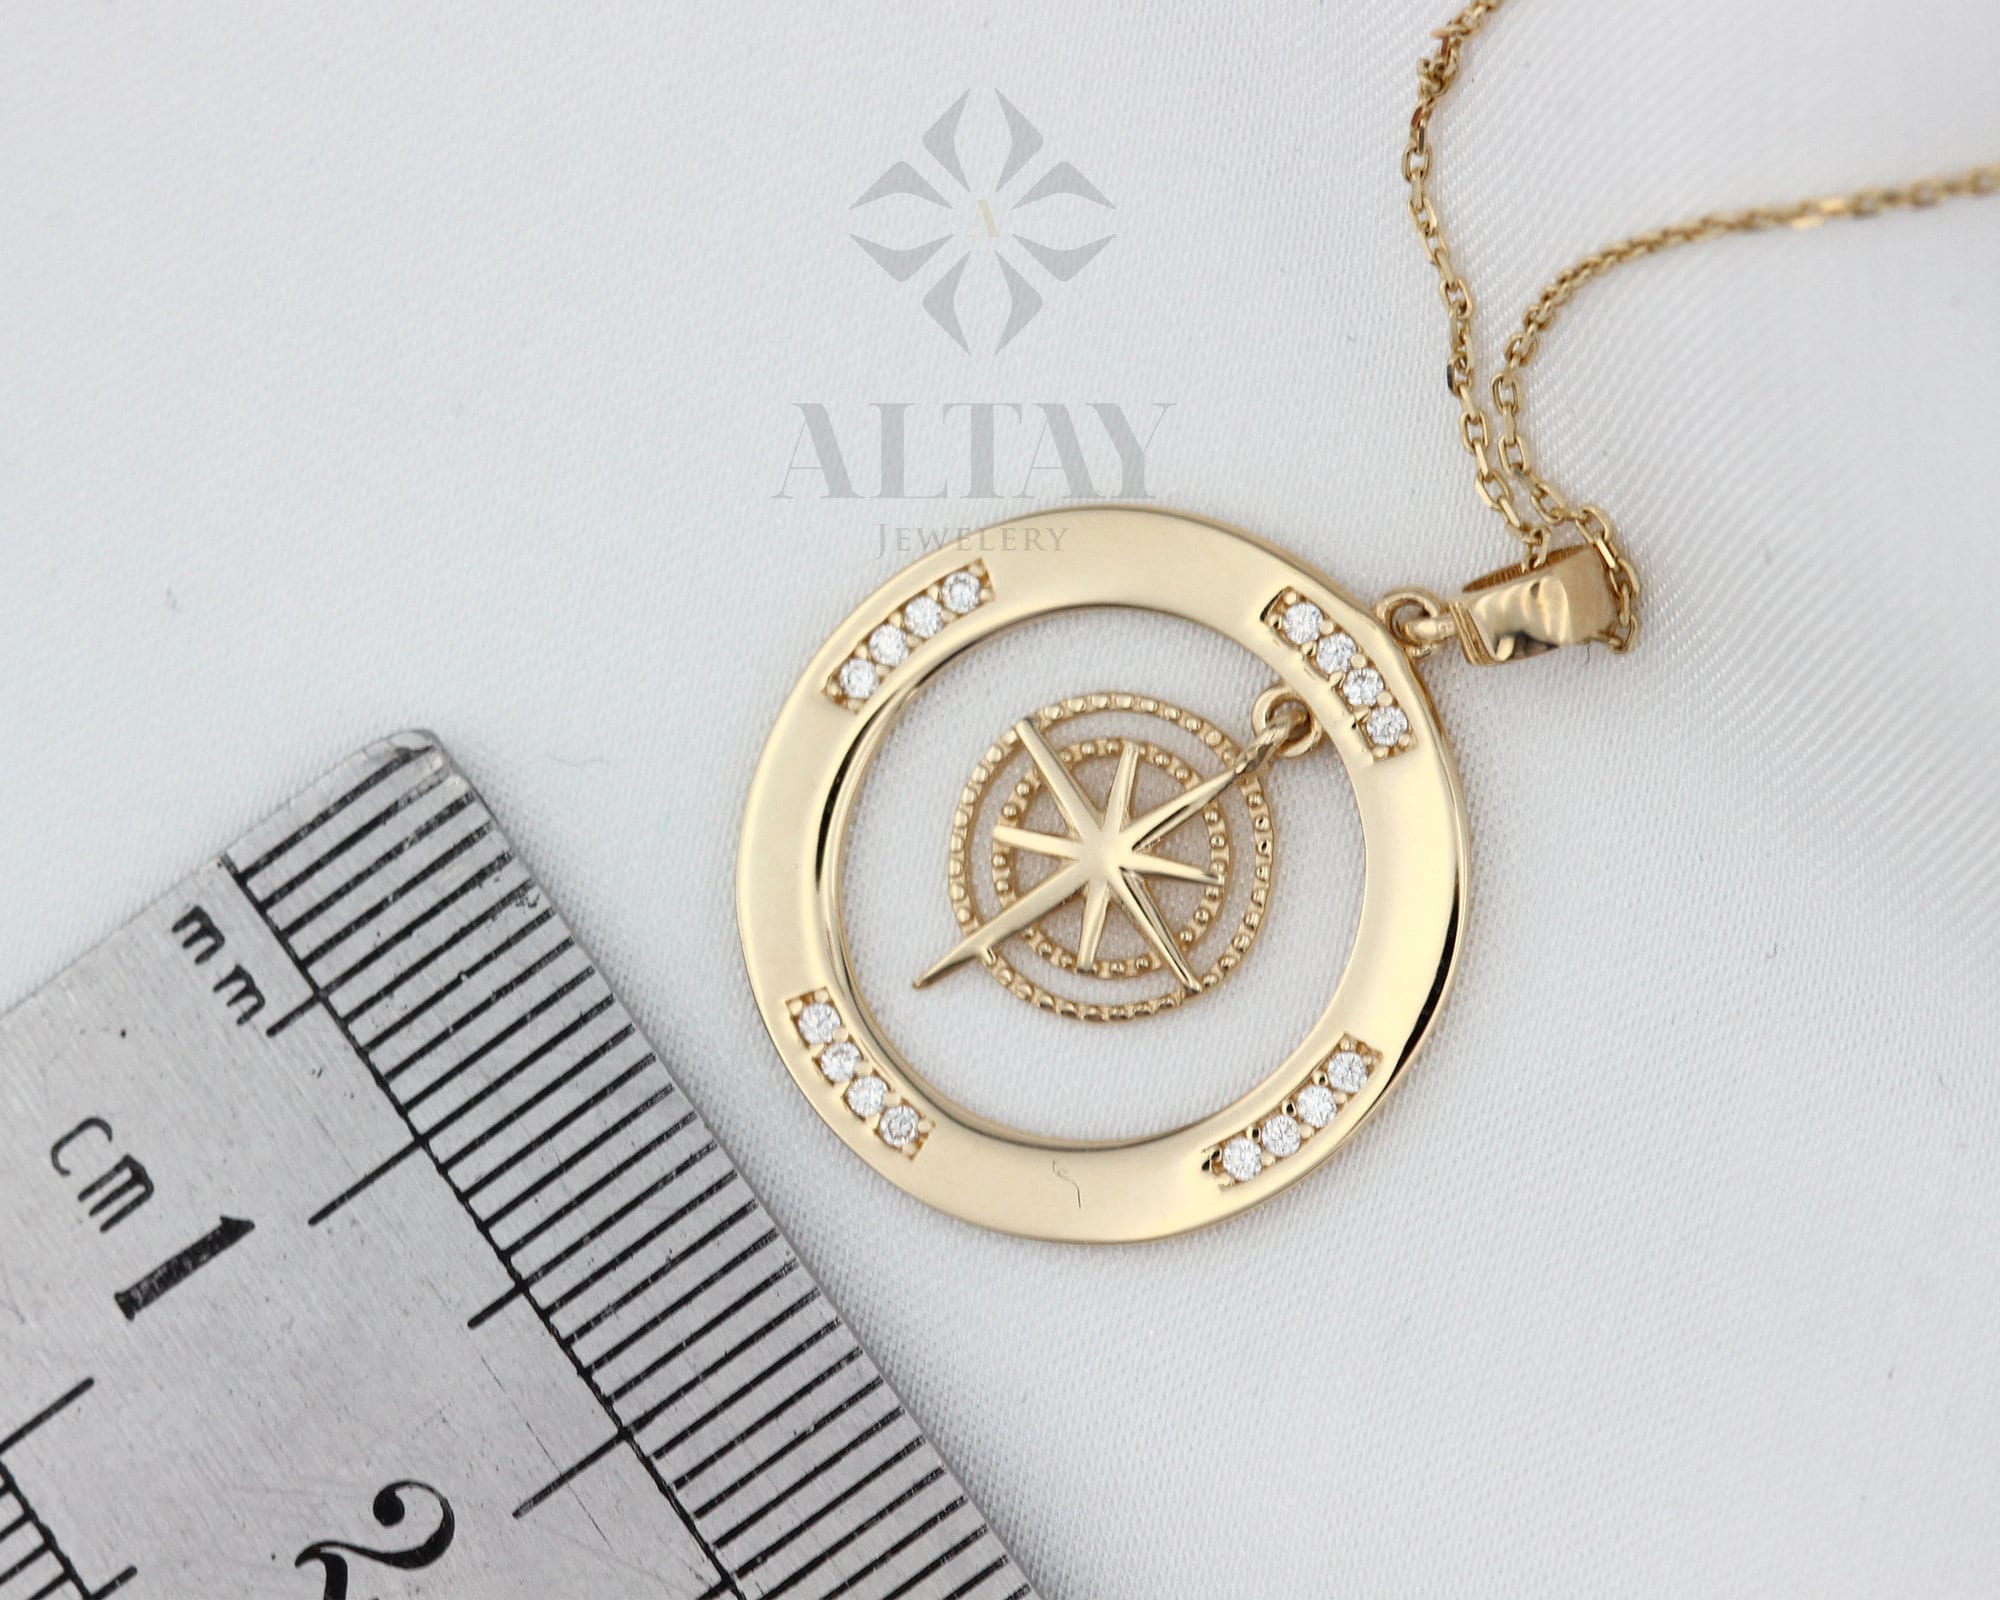 14K Gold Compass Necklace, Polaris Necklace, Travel Necklace, Personalized Compass, Custom North Star Pendant, Celestial Charm Necklace